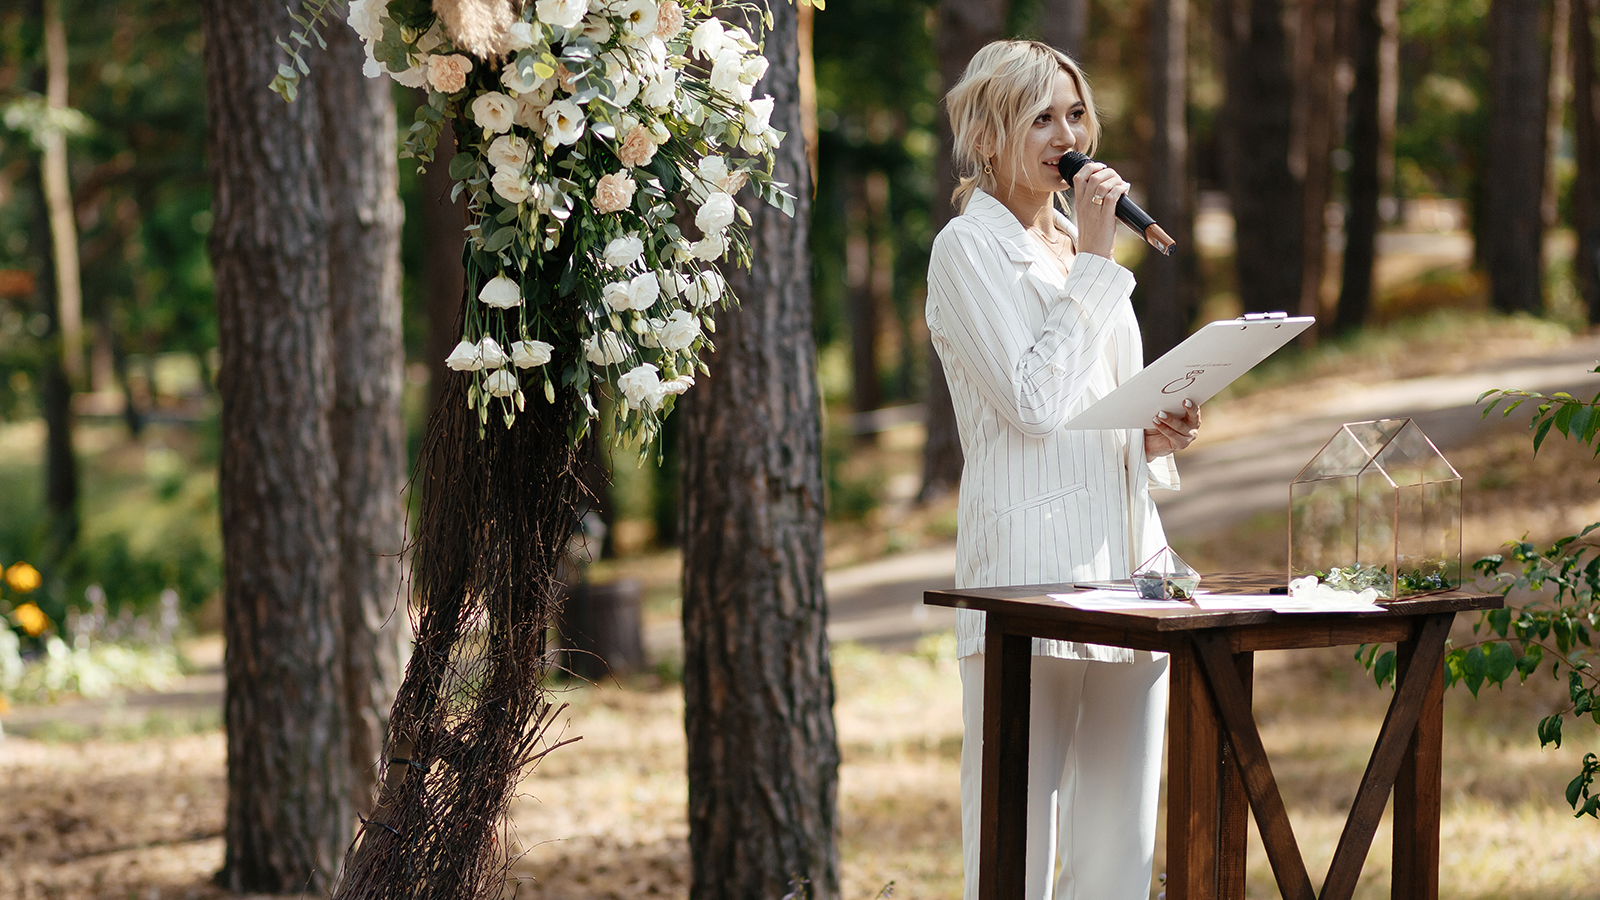 Master of wedding ceremony speeching on microphone on background wedding arch and trees.